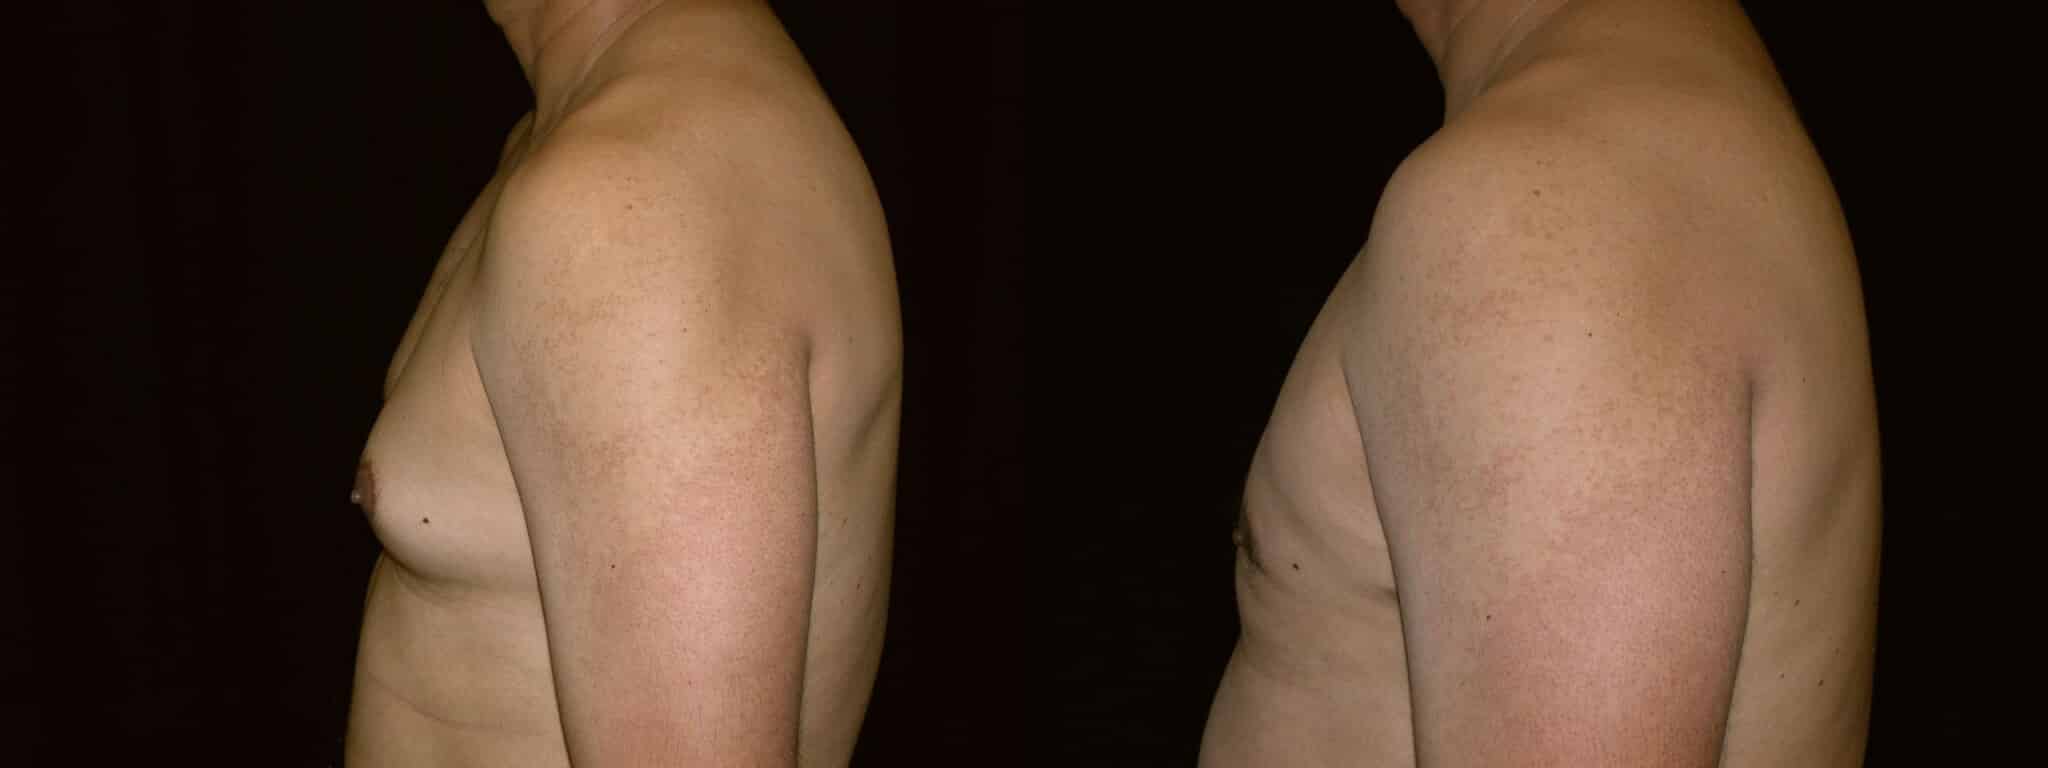 Gynecomastia Patient 9 Before & After Details